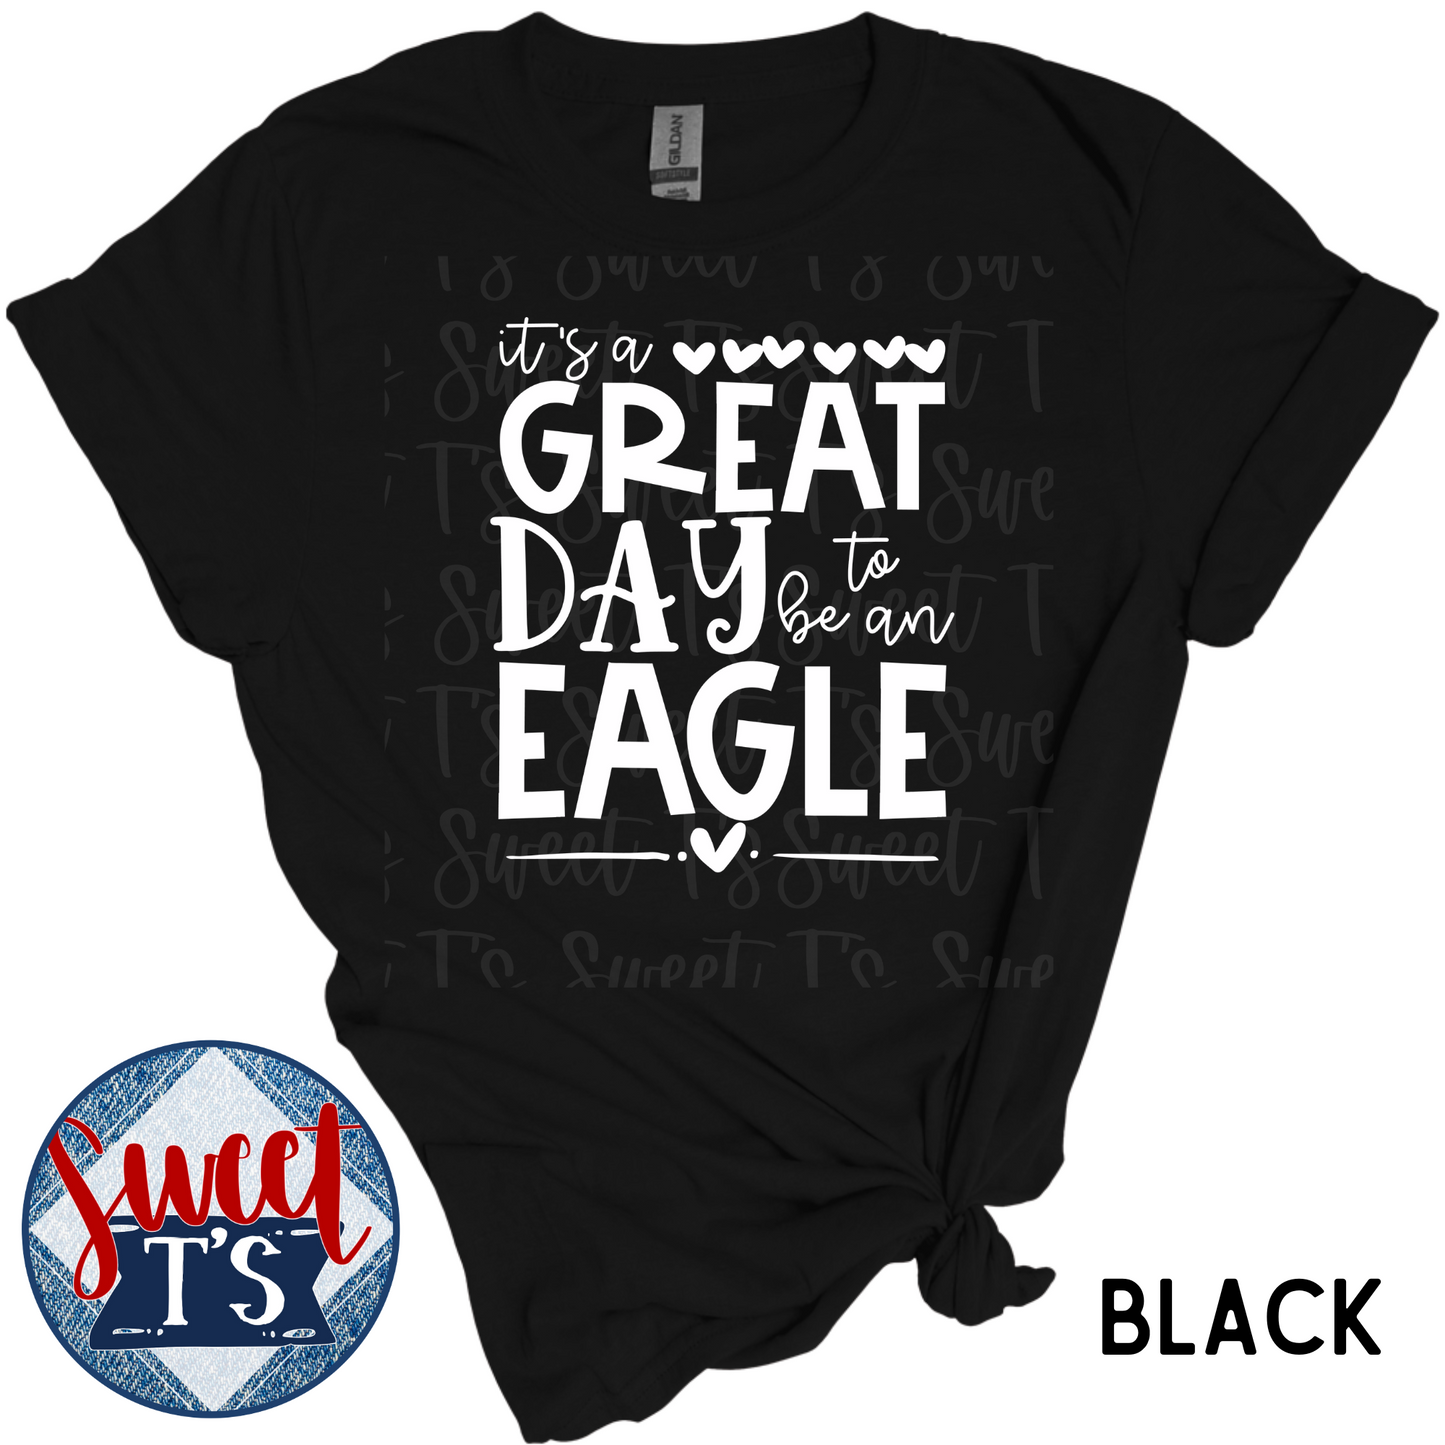 Great Day Eagles (white print)